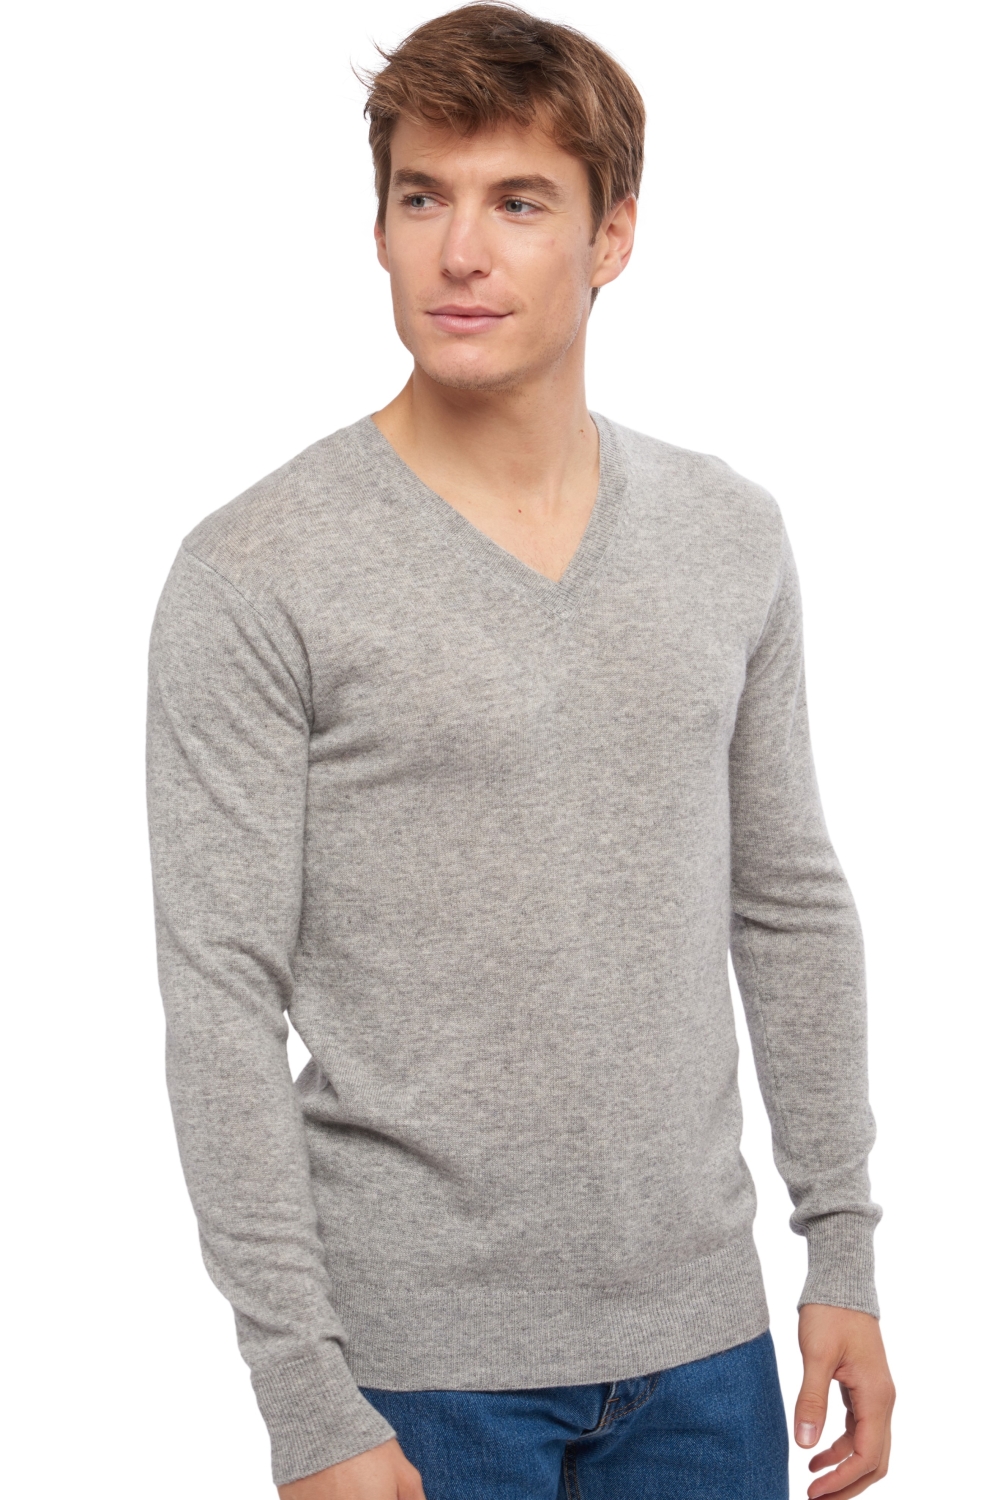 Cashmere men low prices tor first fog grey l